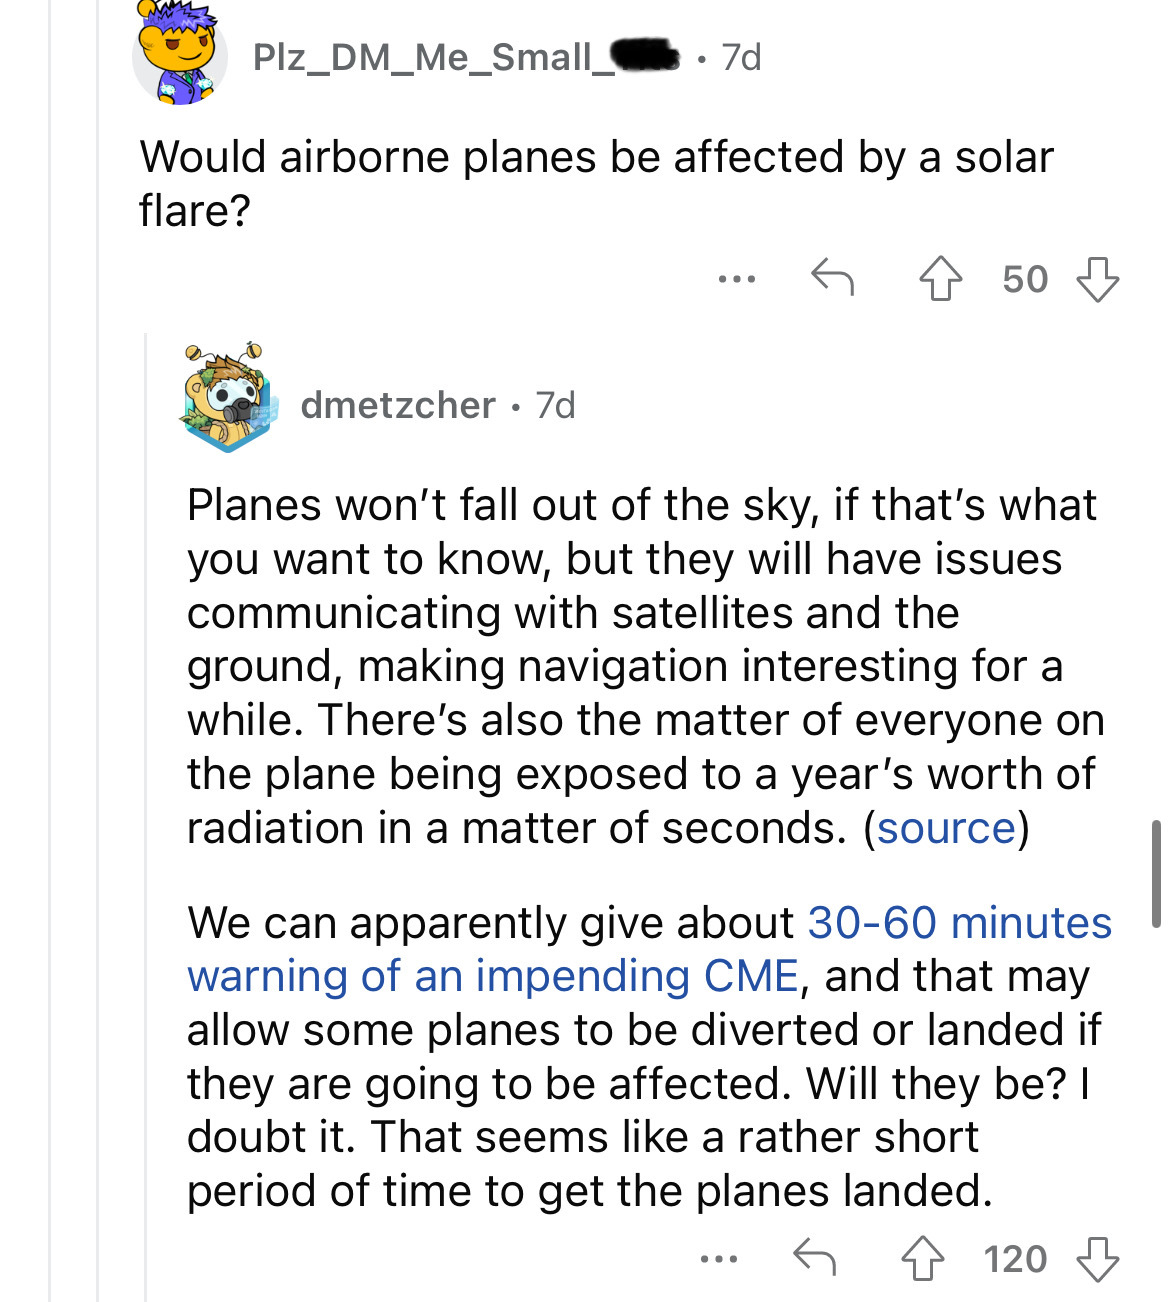 document - Plz_DM_Me_Small_ dmetzcher 7d 7d Would airborne planes be affected by a solar flare? 50 ... Planes won't fall out of the sky, if that's what you want to know, but they will have issues communicating with satellites and the ground, making naviga